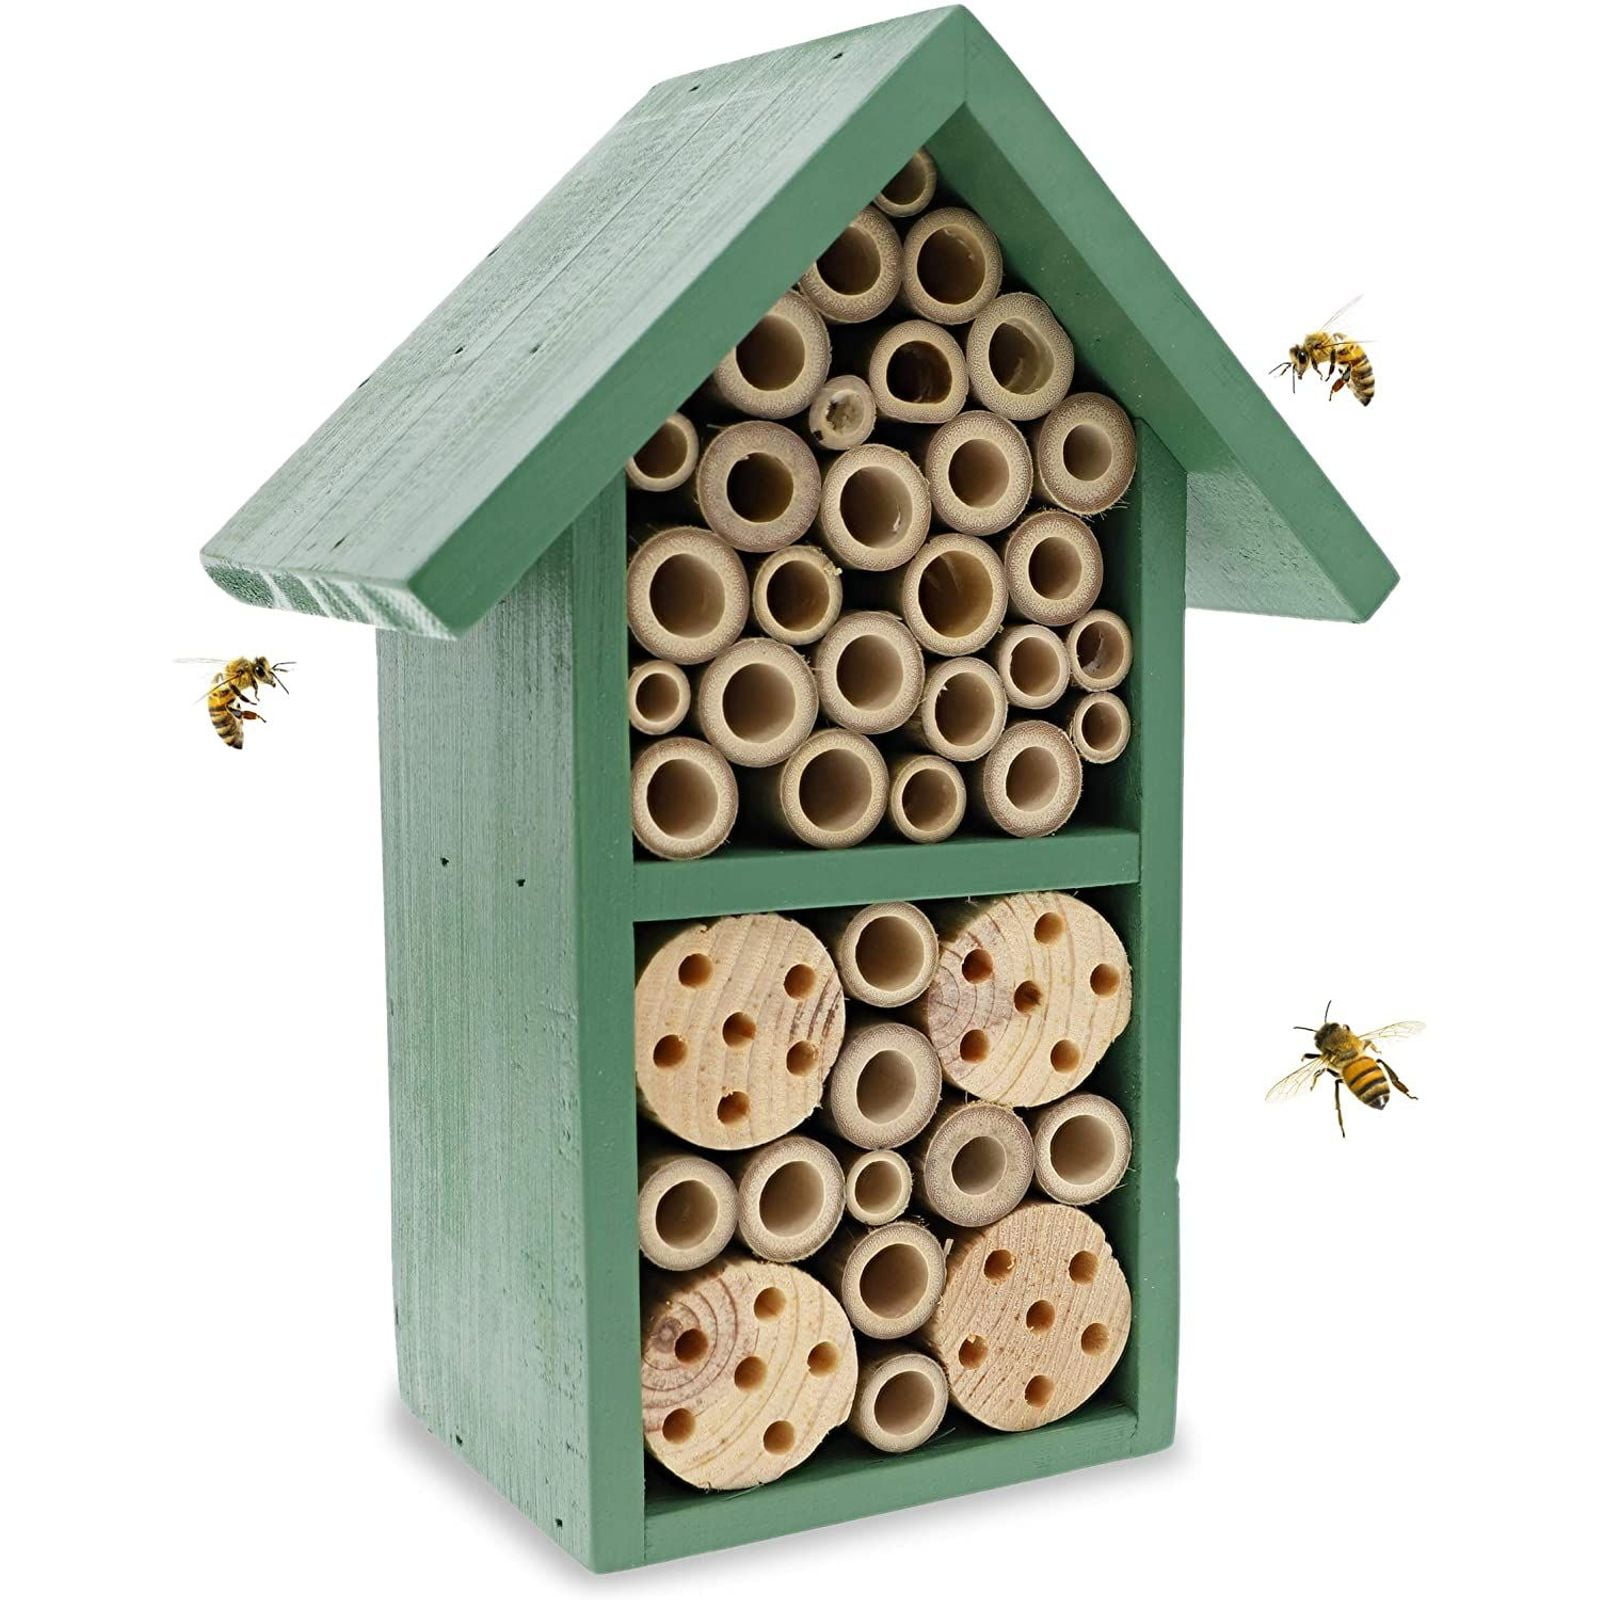 Handmade Natural Wooden Bee Hive Coated with Wax for Water-Proof and Long Service Life POLLIBEE Mason Bee House Attracts Peaceful Bee Pollinators to Enhance Your Gardens Productivity 